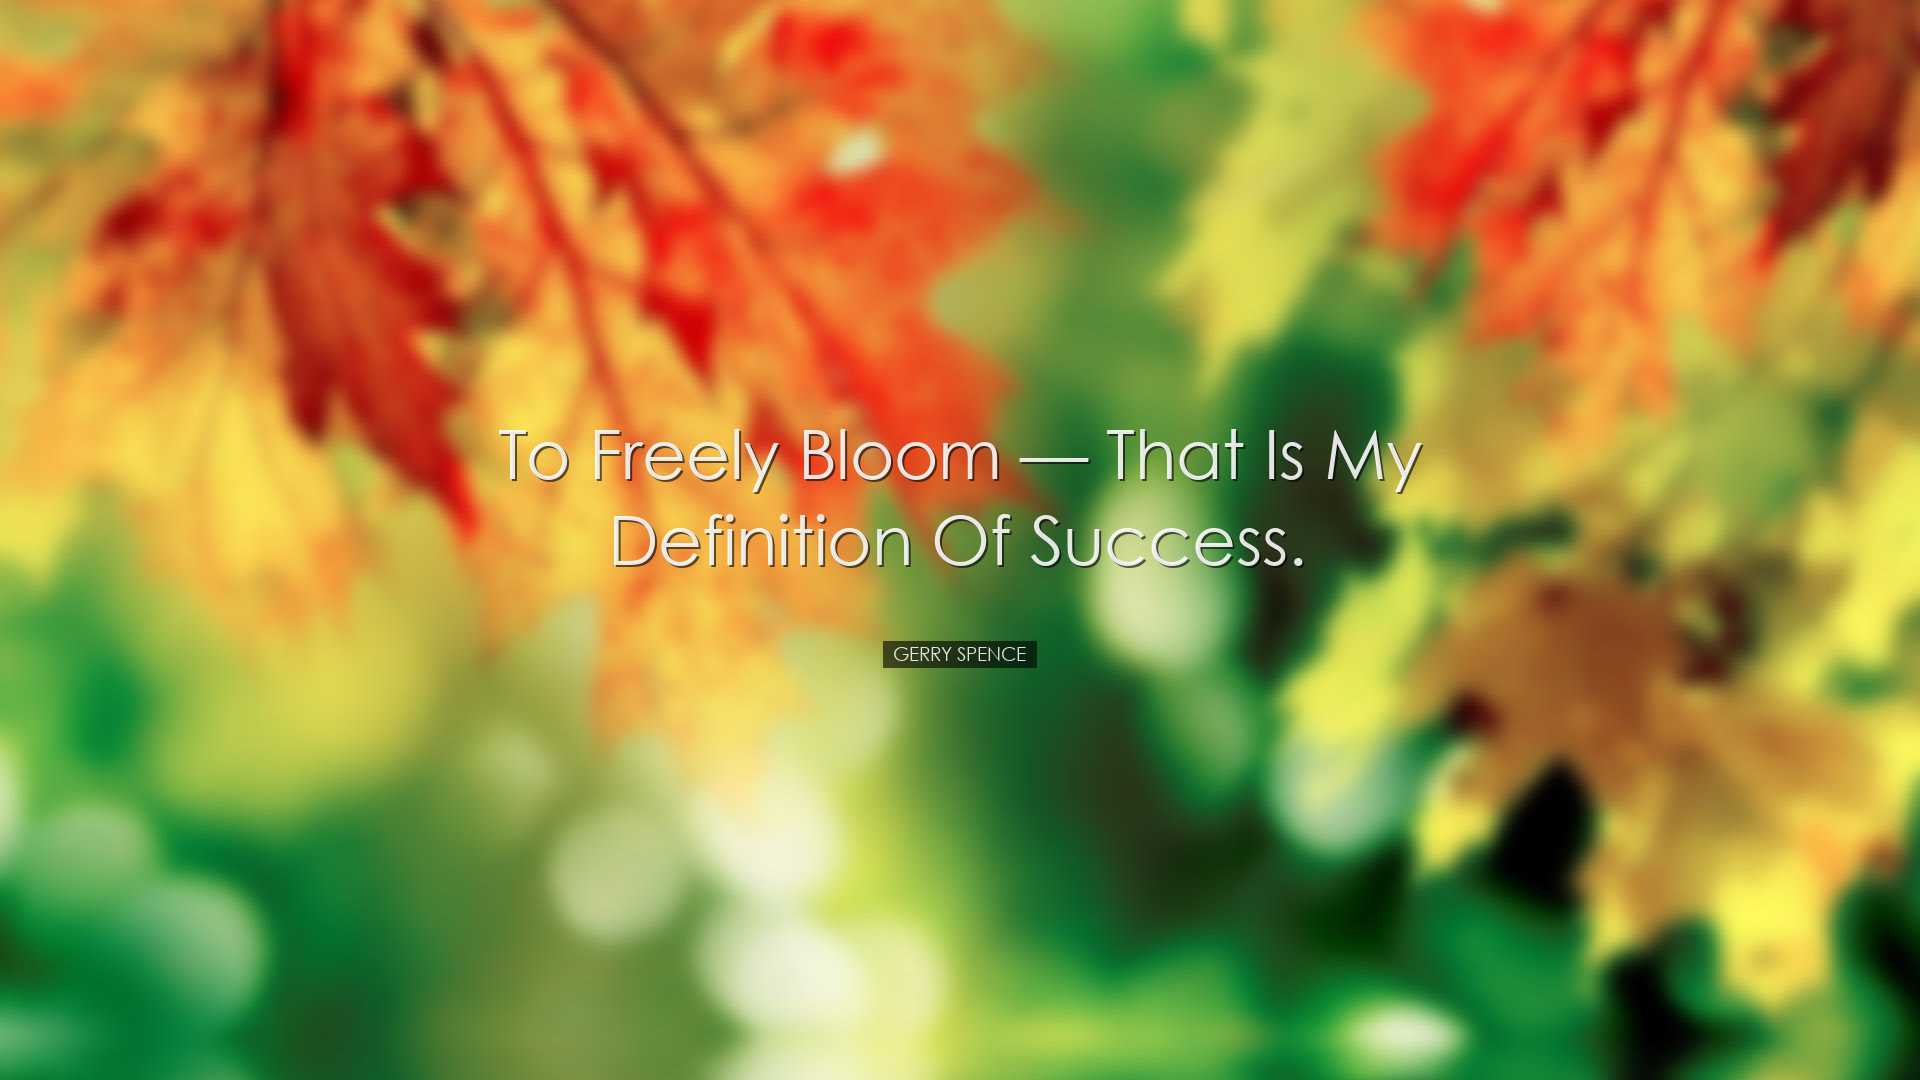 To freely bloom â€” that is my definition of success. - Gerry